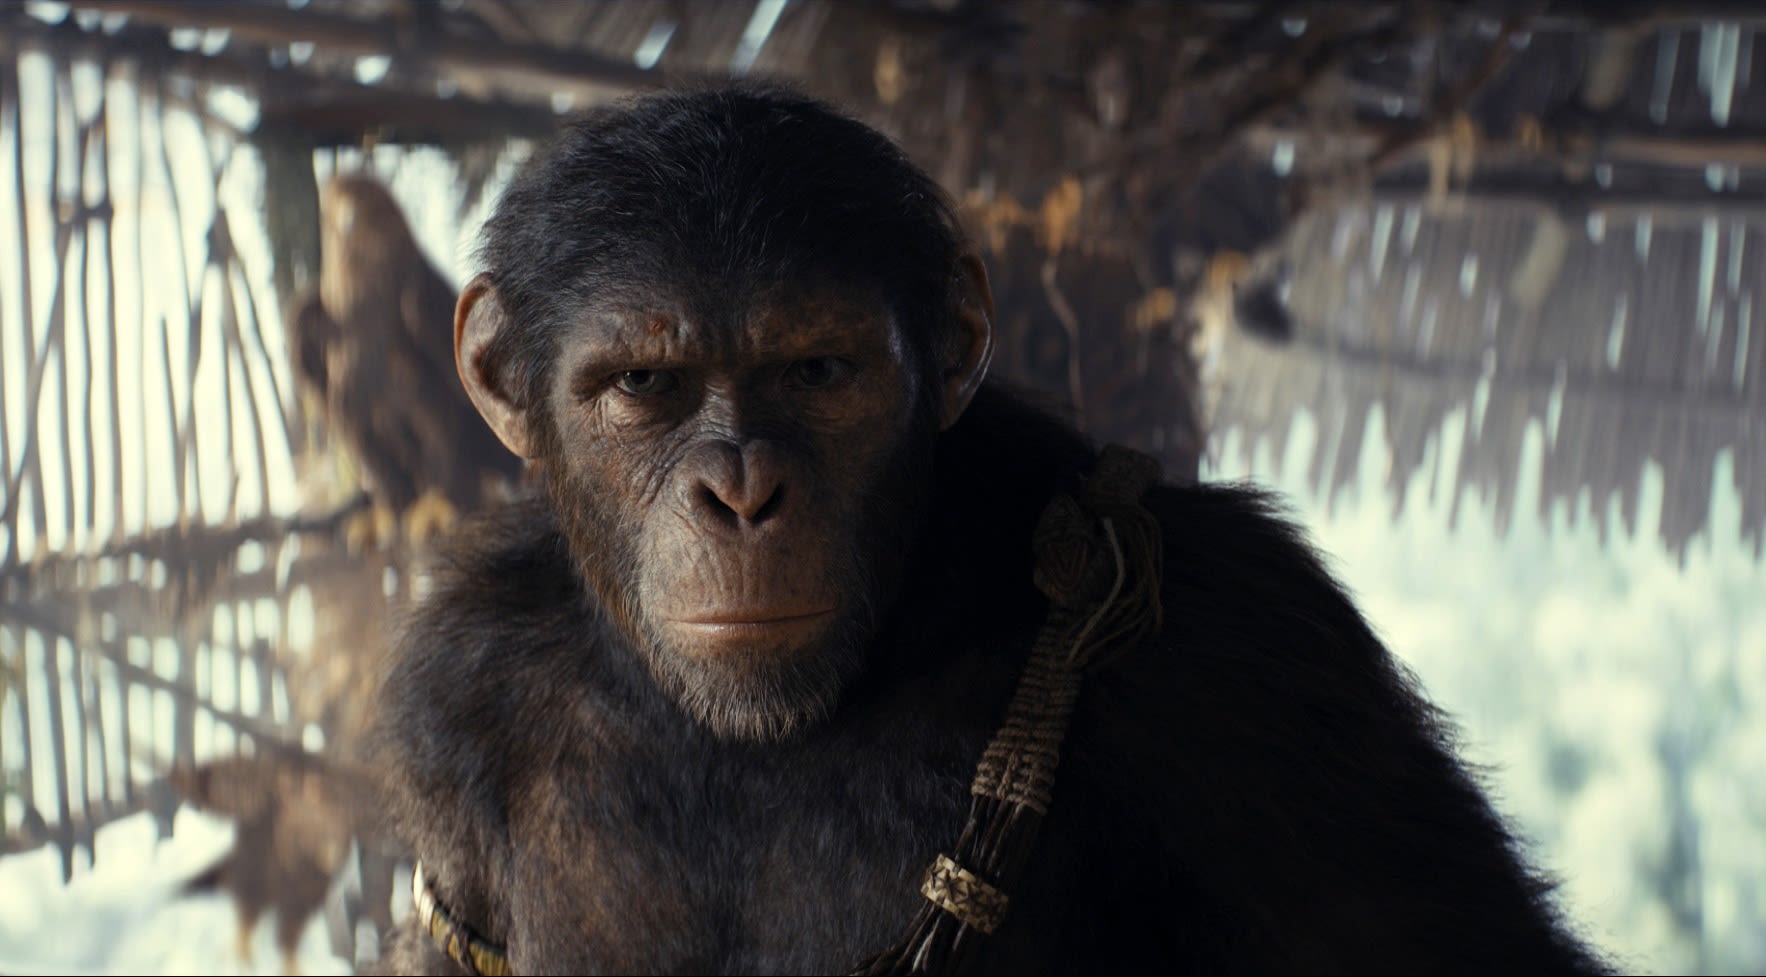 ‘Kingdom of the Planet of the Apes’ reigns at box office with $56.5 million opening - WTOP News